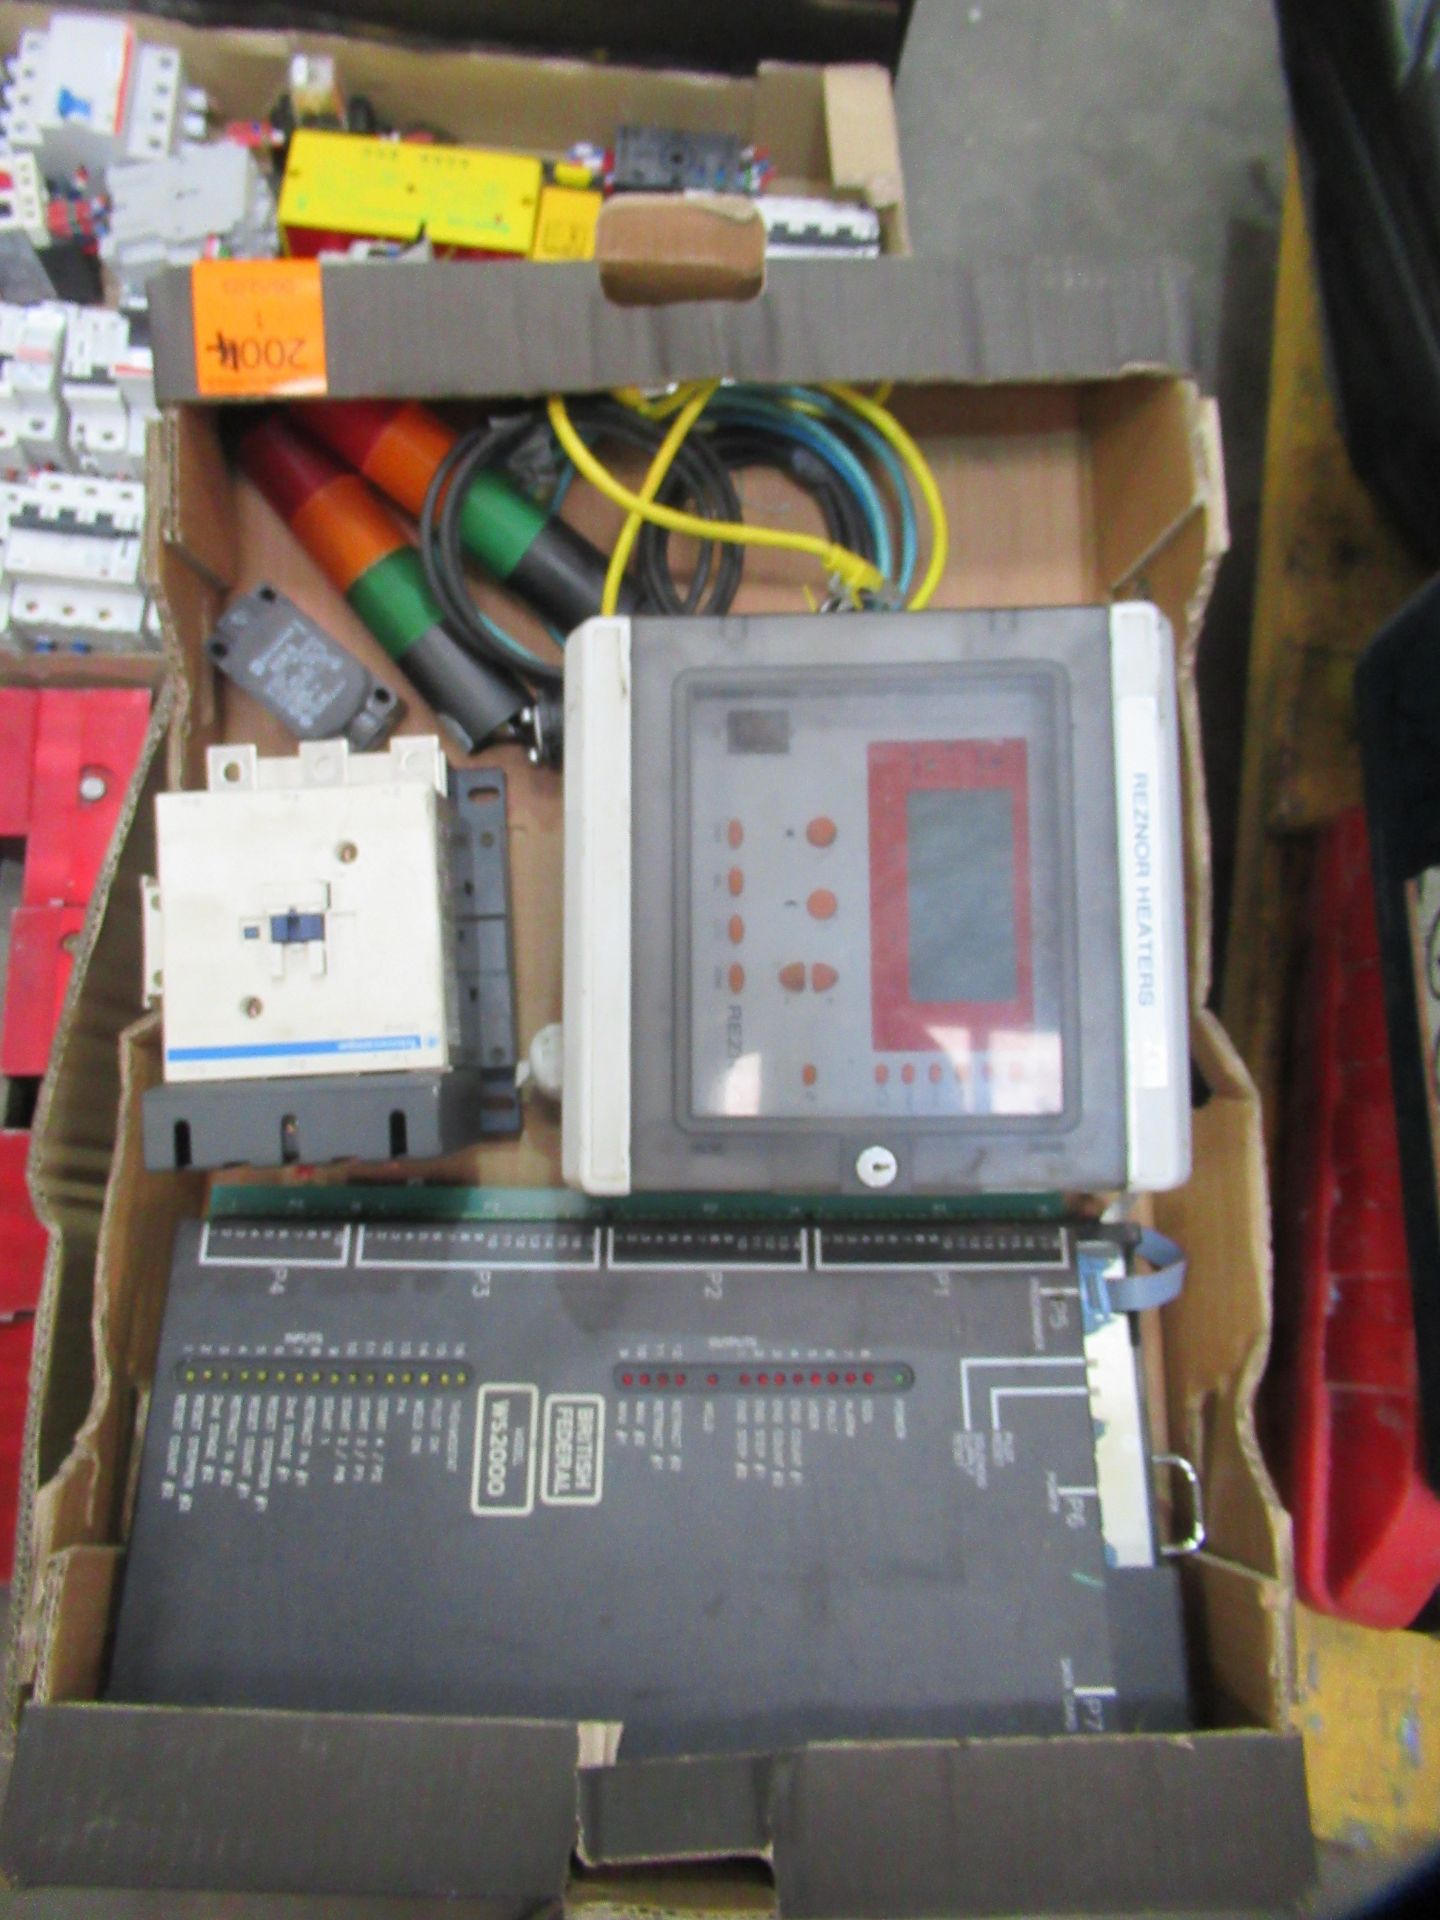 Contents of Pallet - Image 5 of 5